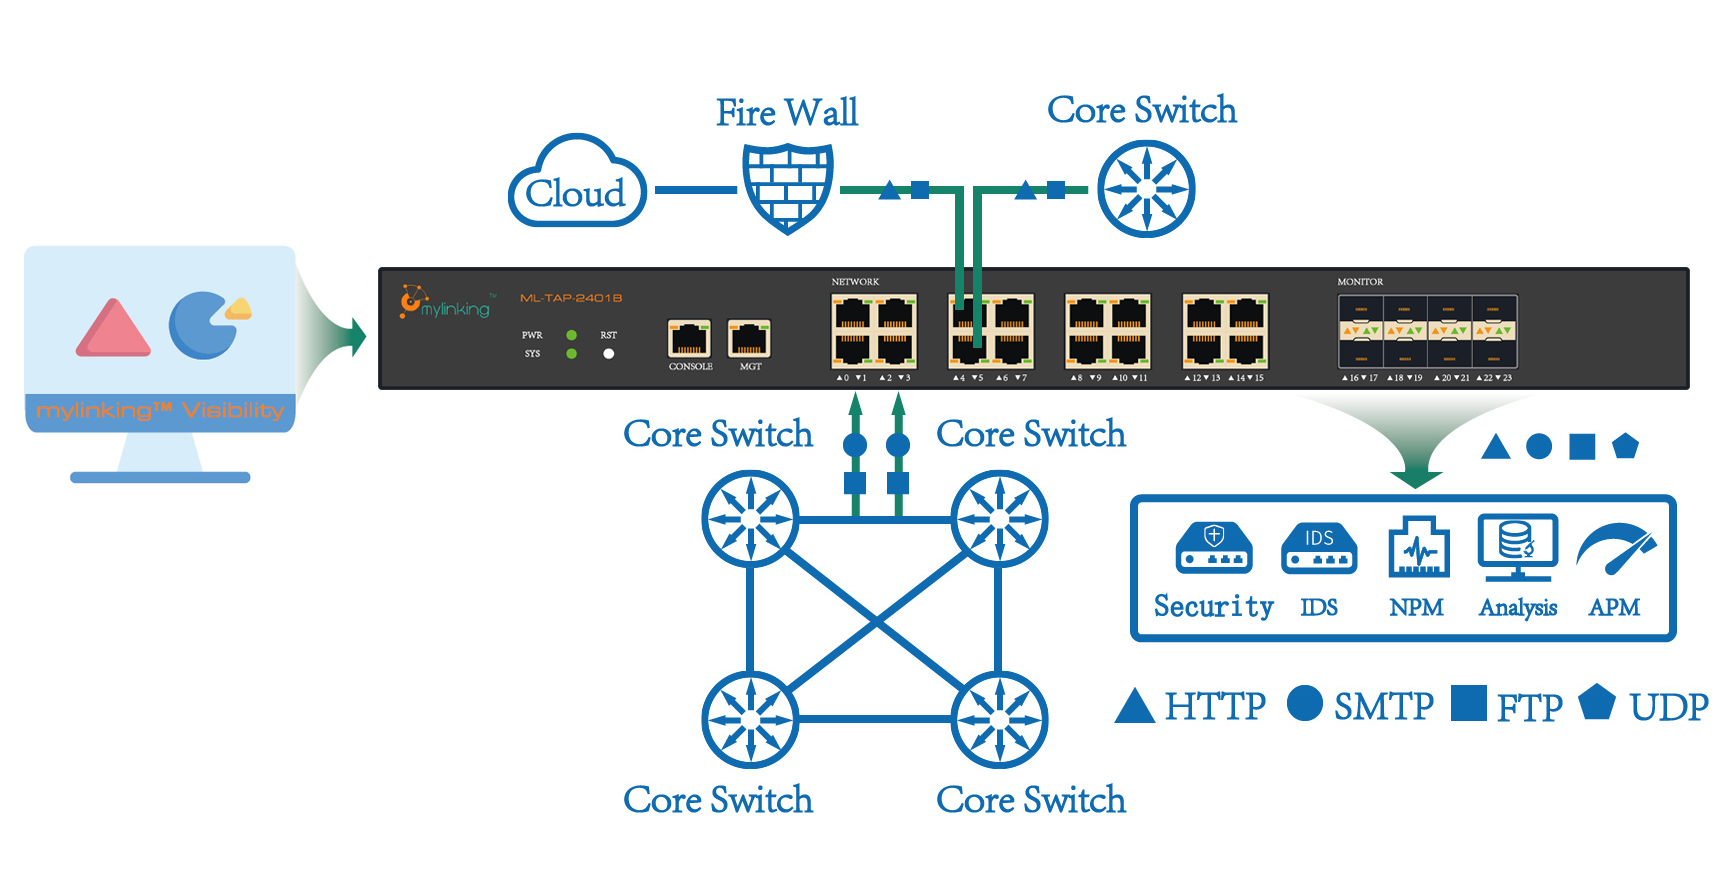 What’s features of the Network Packet Broker(NPB) & Test Access Port (TAP)?